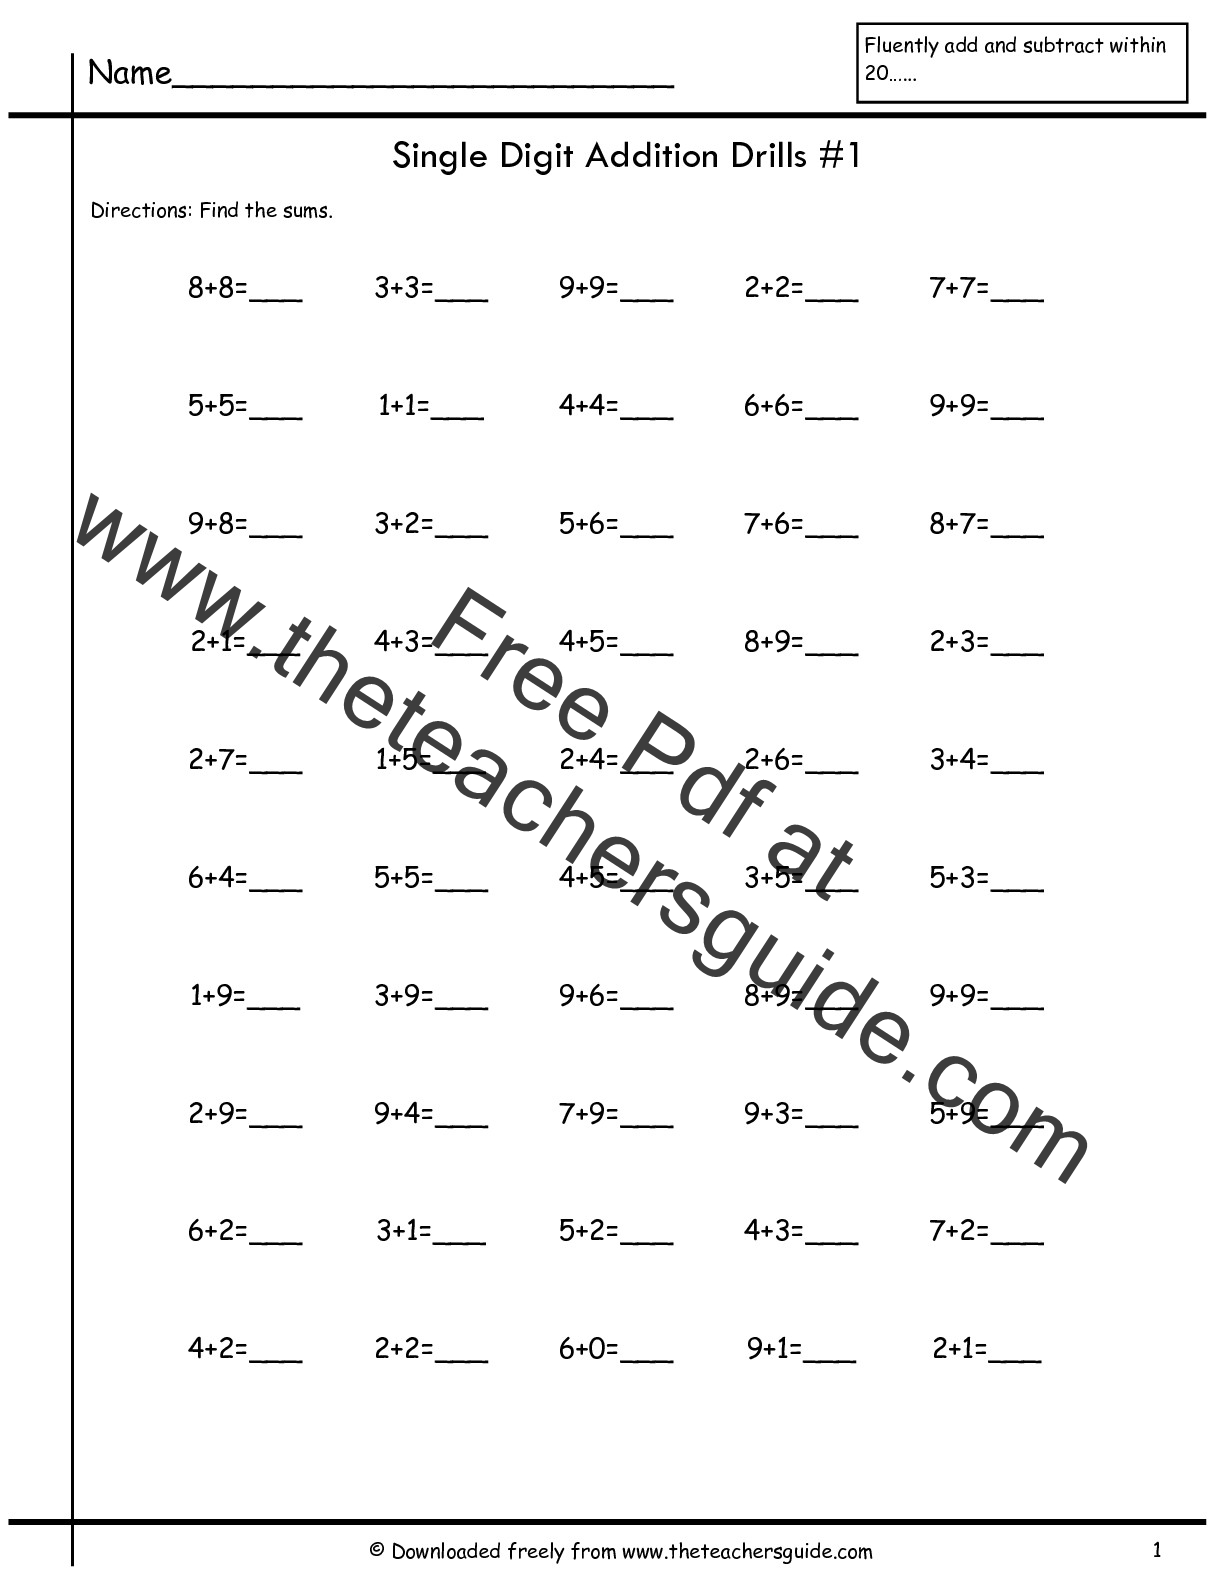 Single Digit Addition Fluency Drills From The Teacher s Guide